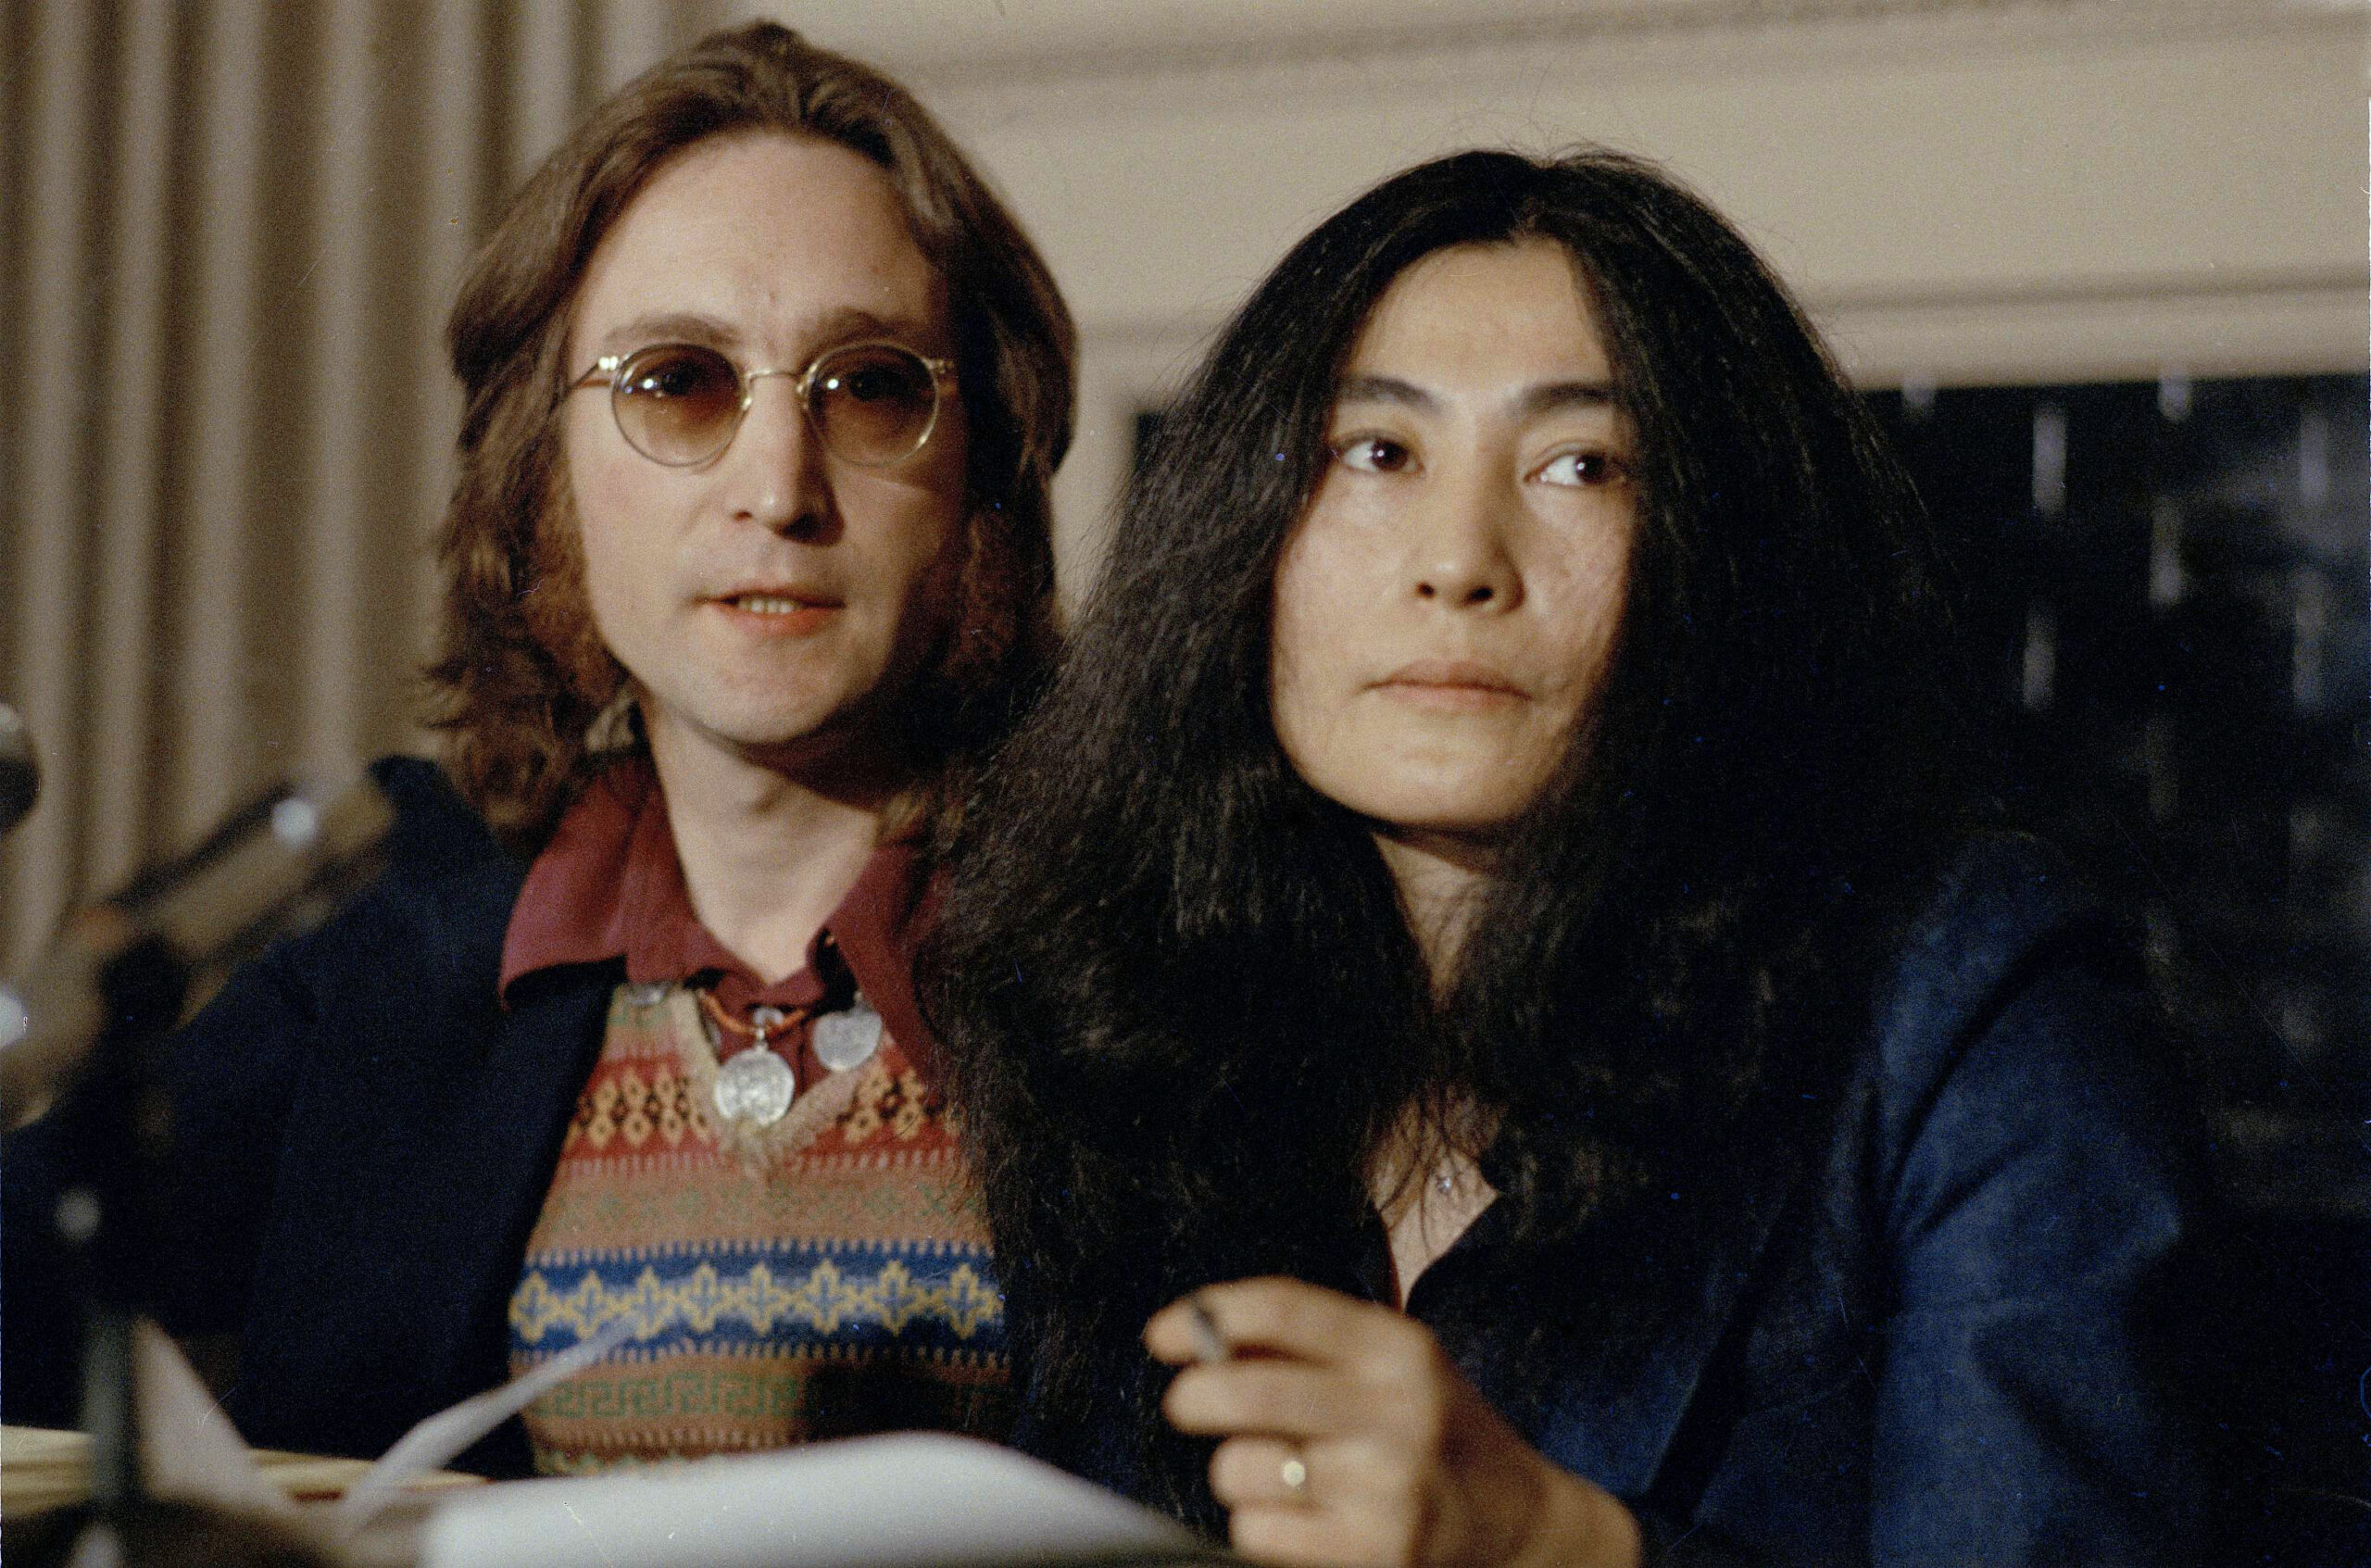 John Lennon and his wife Yoko Ono speak at a press conference, March 2, 1973, in New York.  (AP Photo)